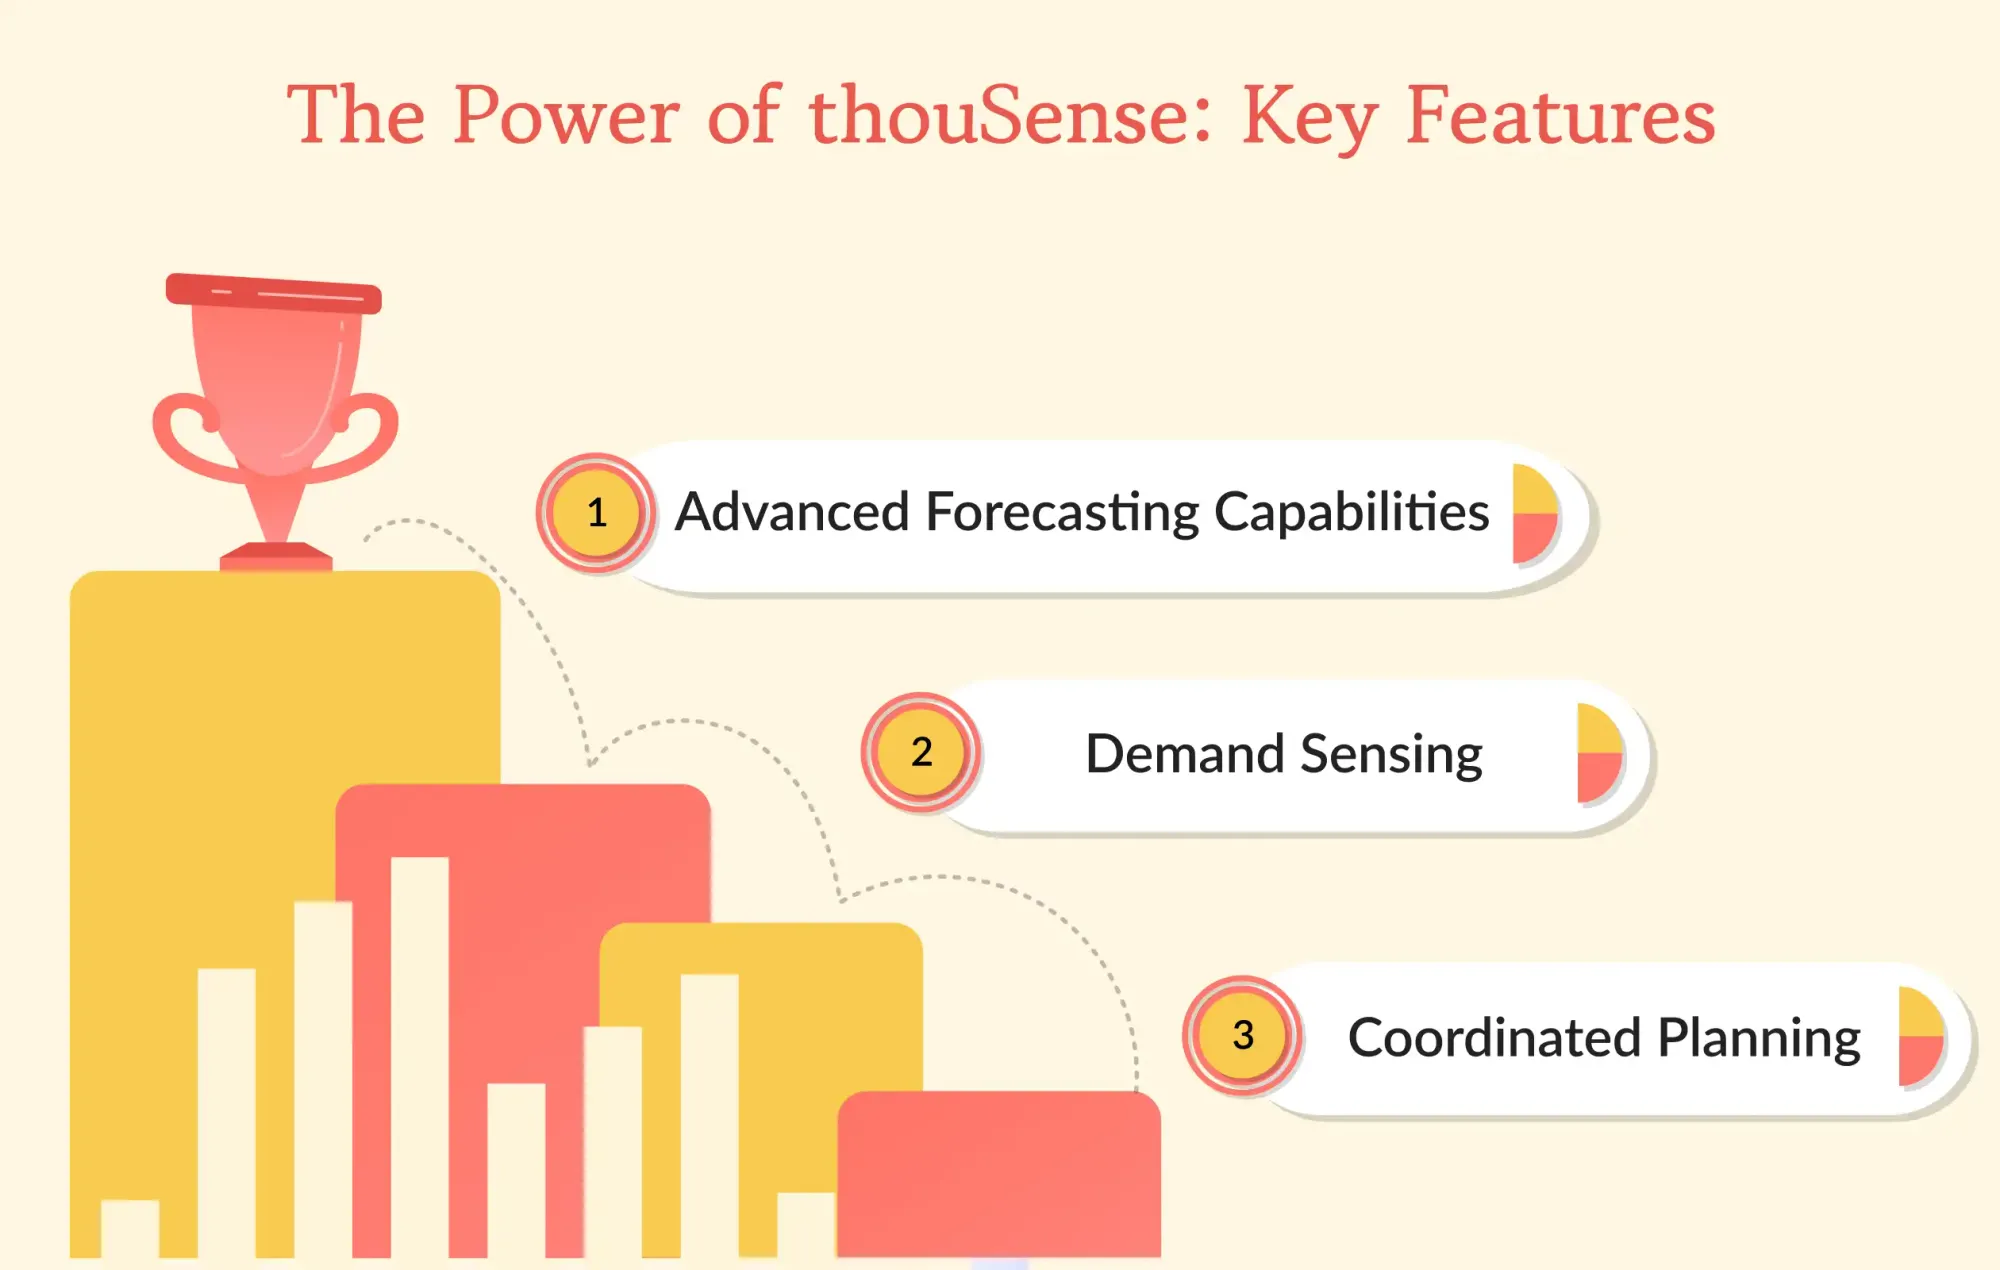 The Power of Thousense: Key Features